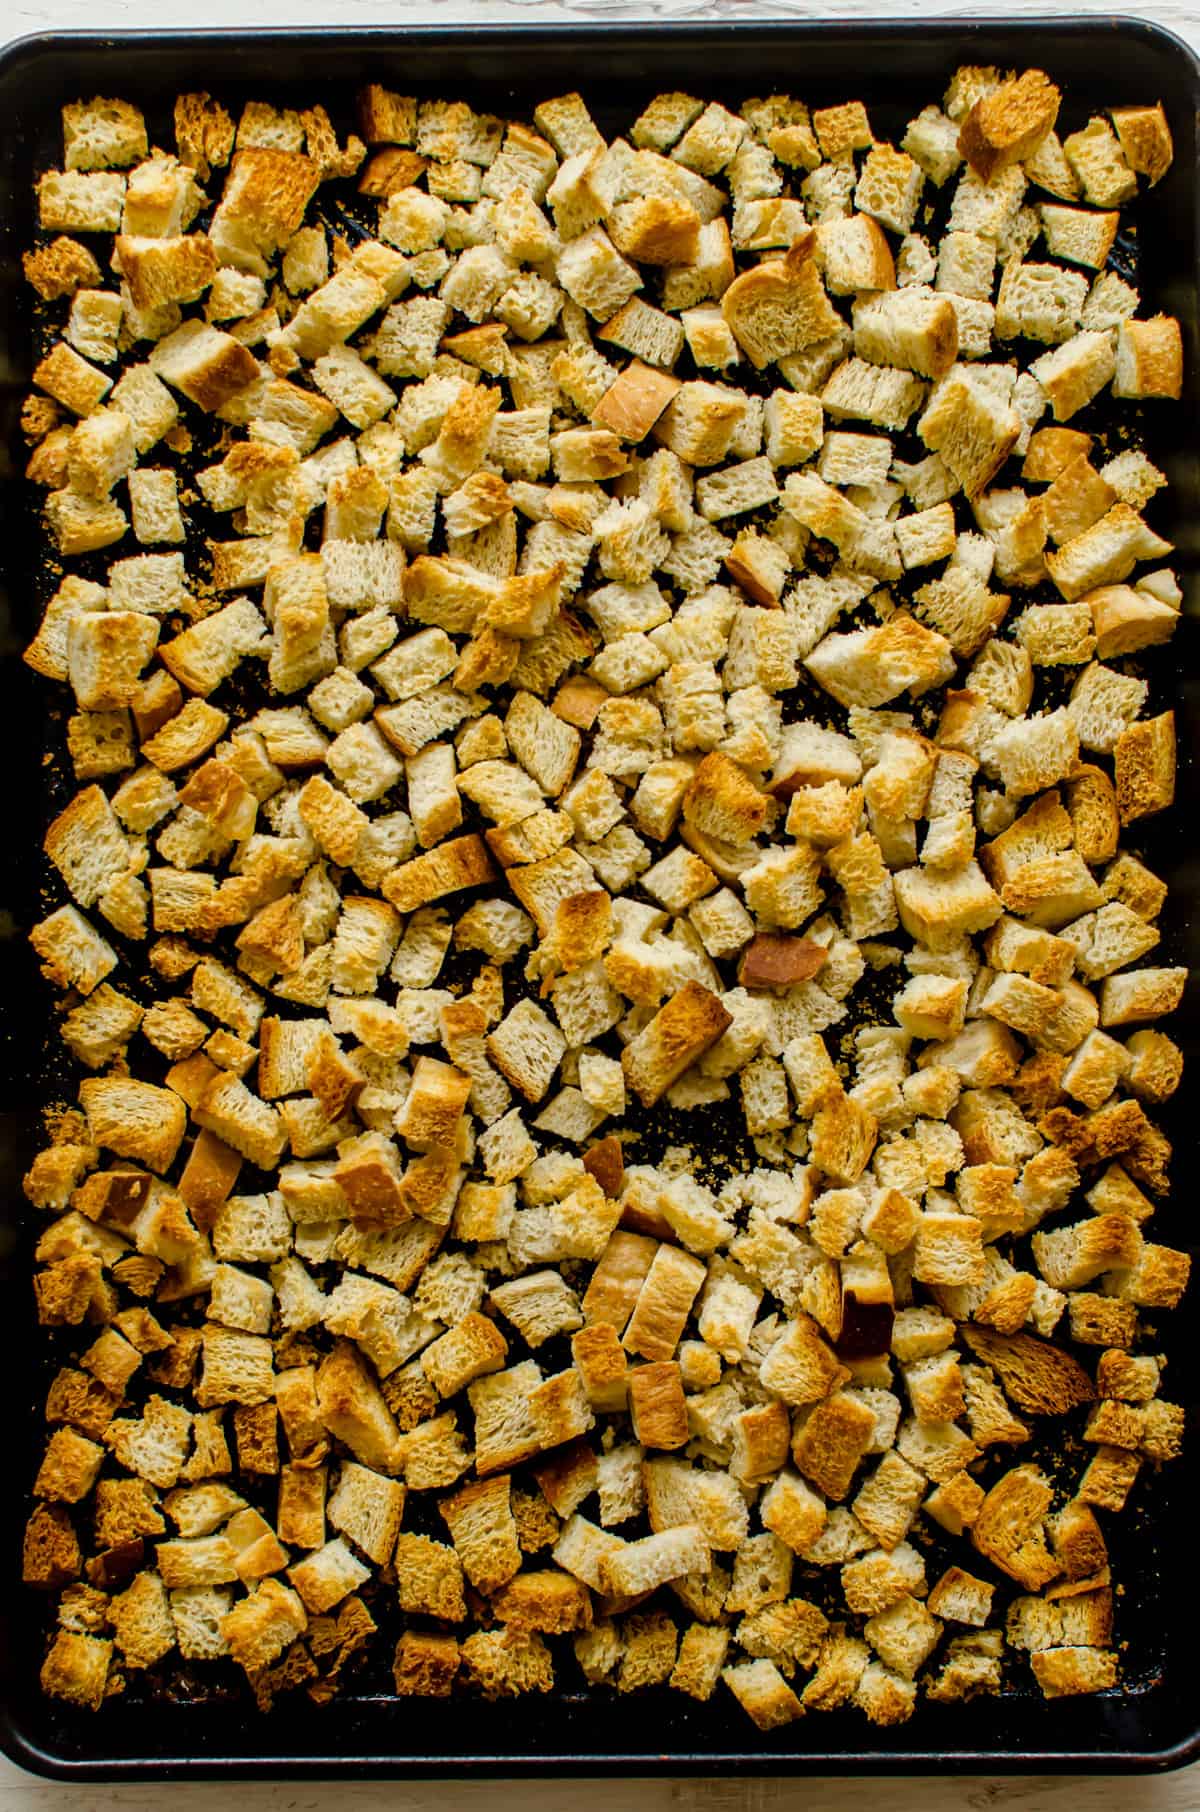 Toasted bread cubes on a sheet pan.